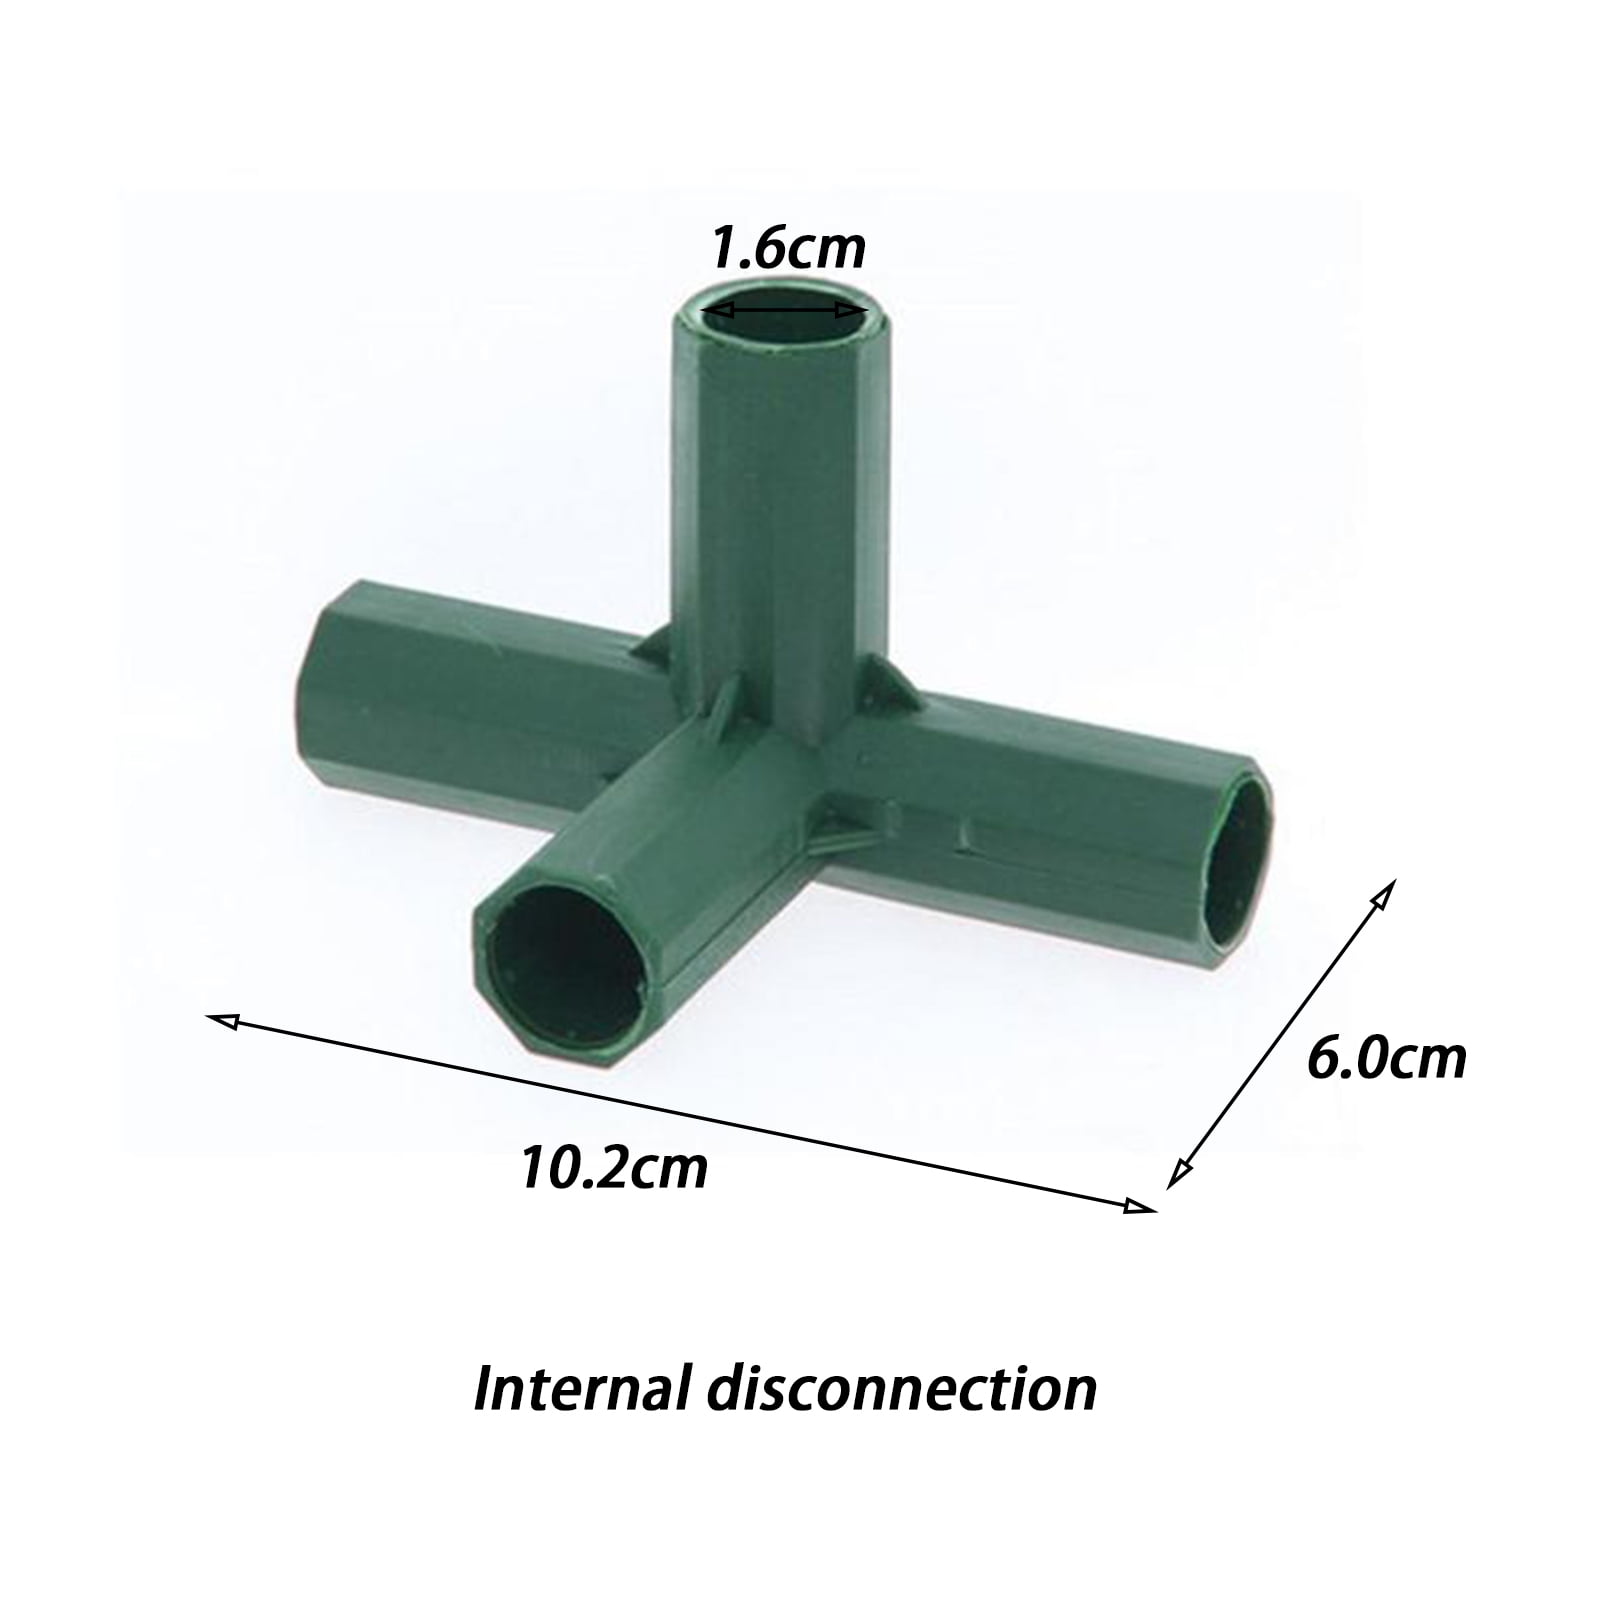 Funsquare 4PCS 16MM Greenhouse Frame Connectors PVC Fitting 5 Types Stable Support Heavy Duty Greenhouse Frame Building Connector Cane Connectors